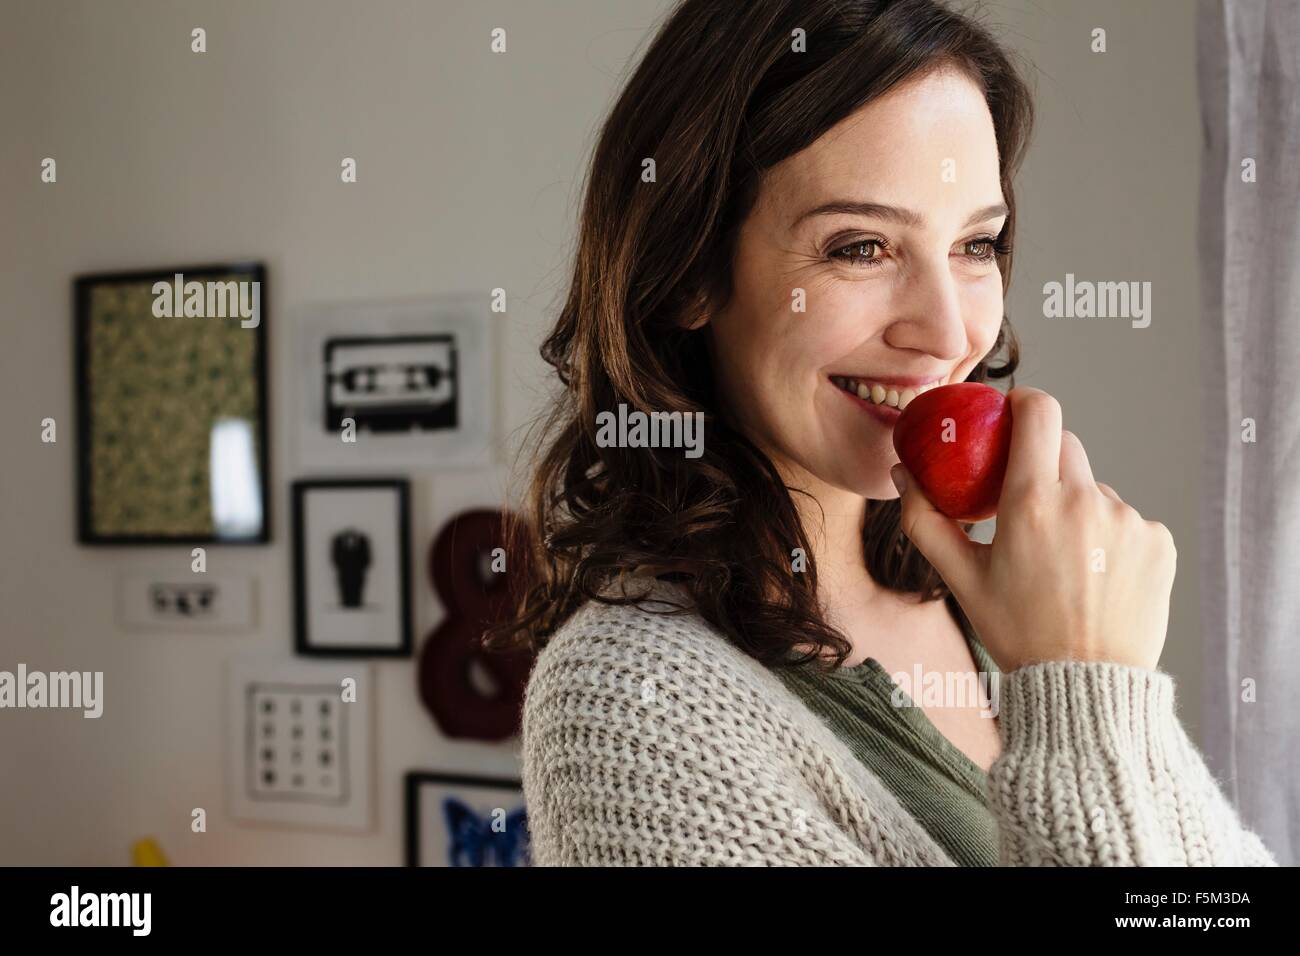 Happy woman with an apple Stock Photo